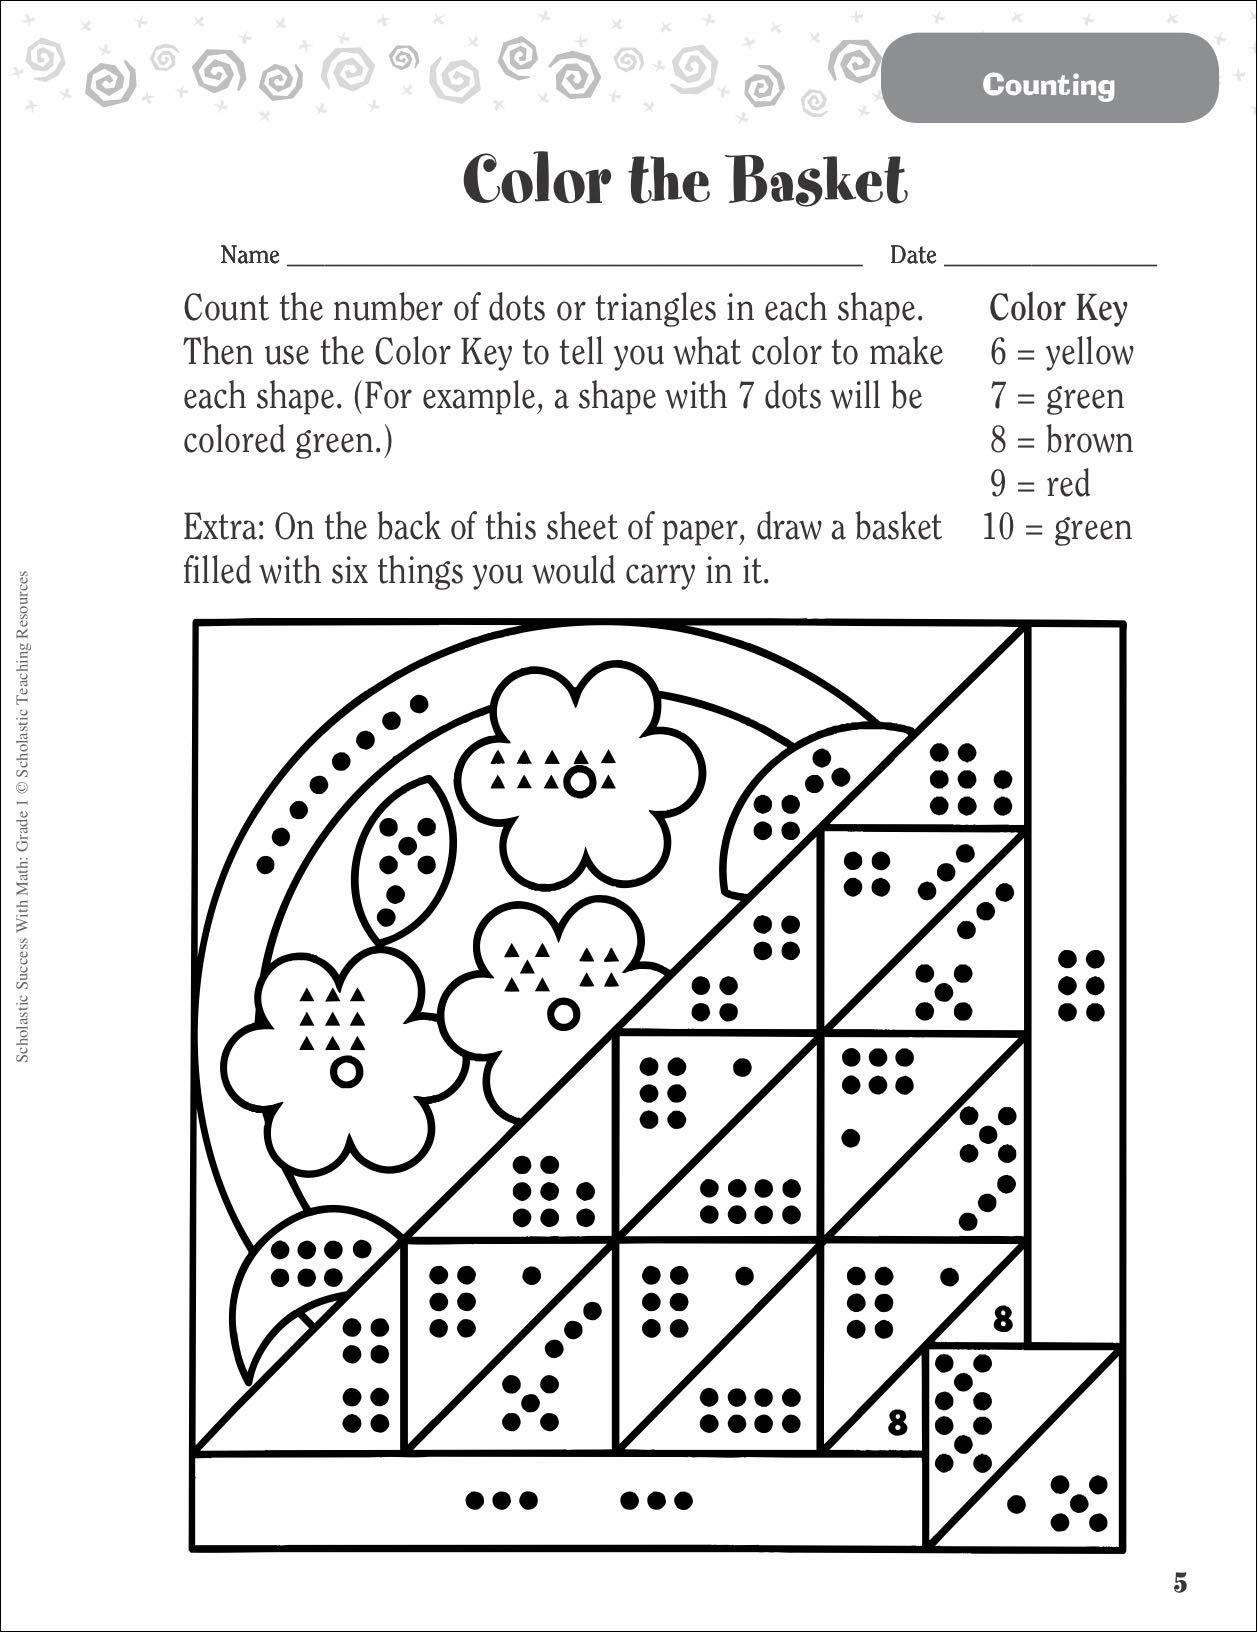 Reading Worskheets: Daily Reading Comprehension Grade with Printable Decimal Multiplication Games